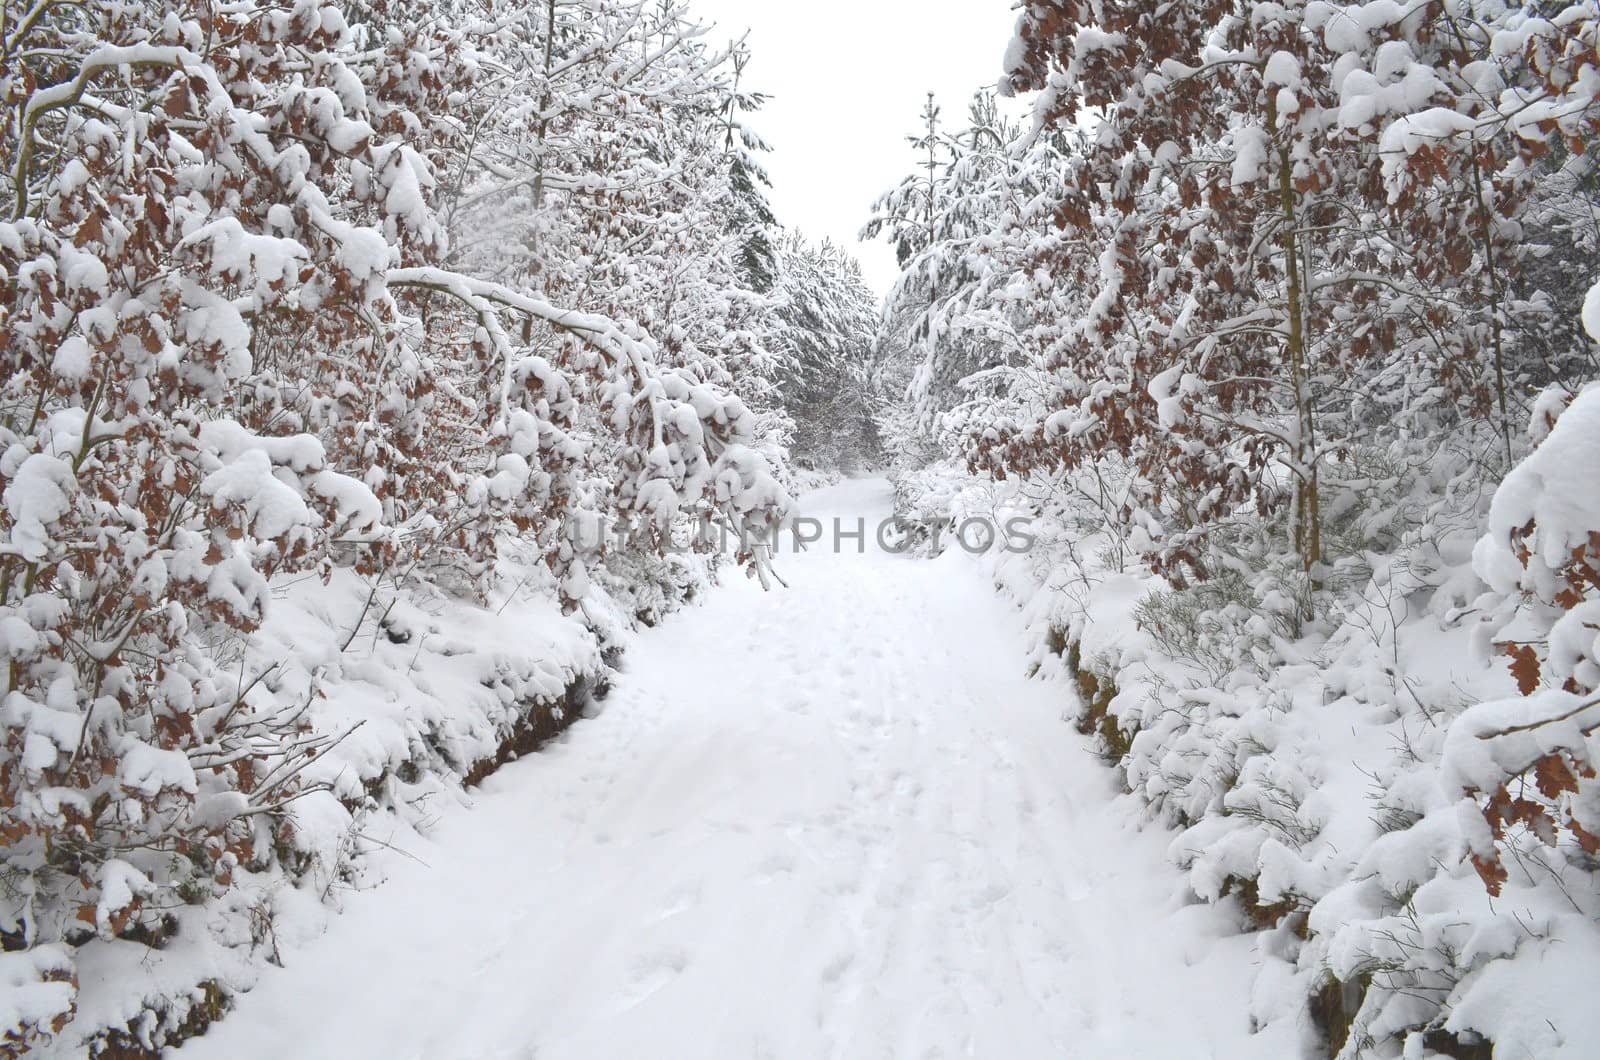 Conifer forest under snow cover with road